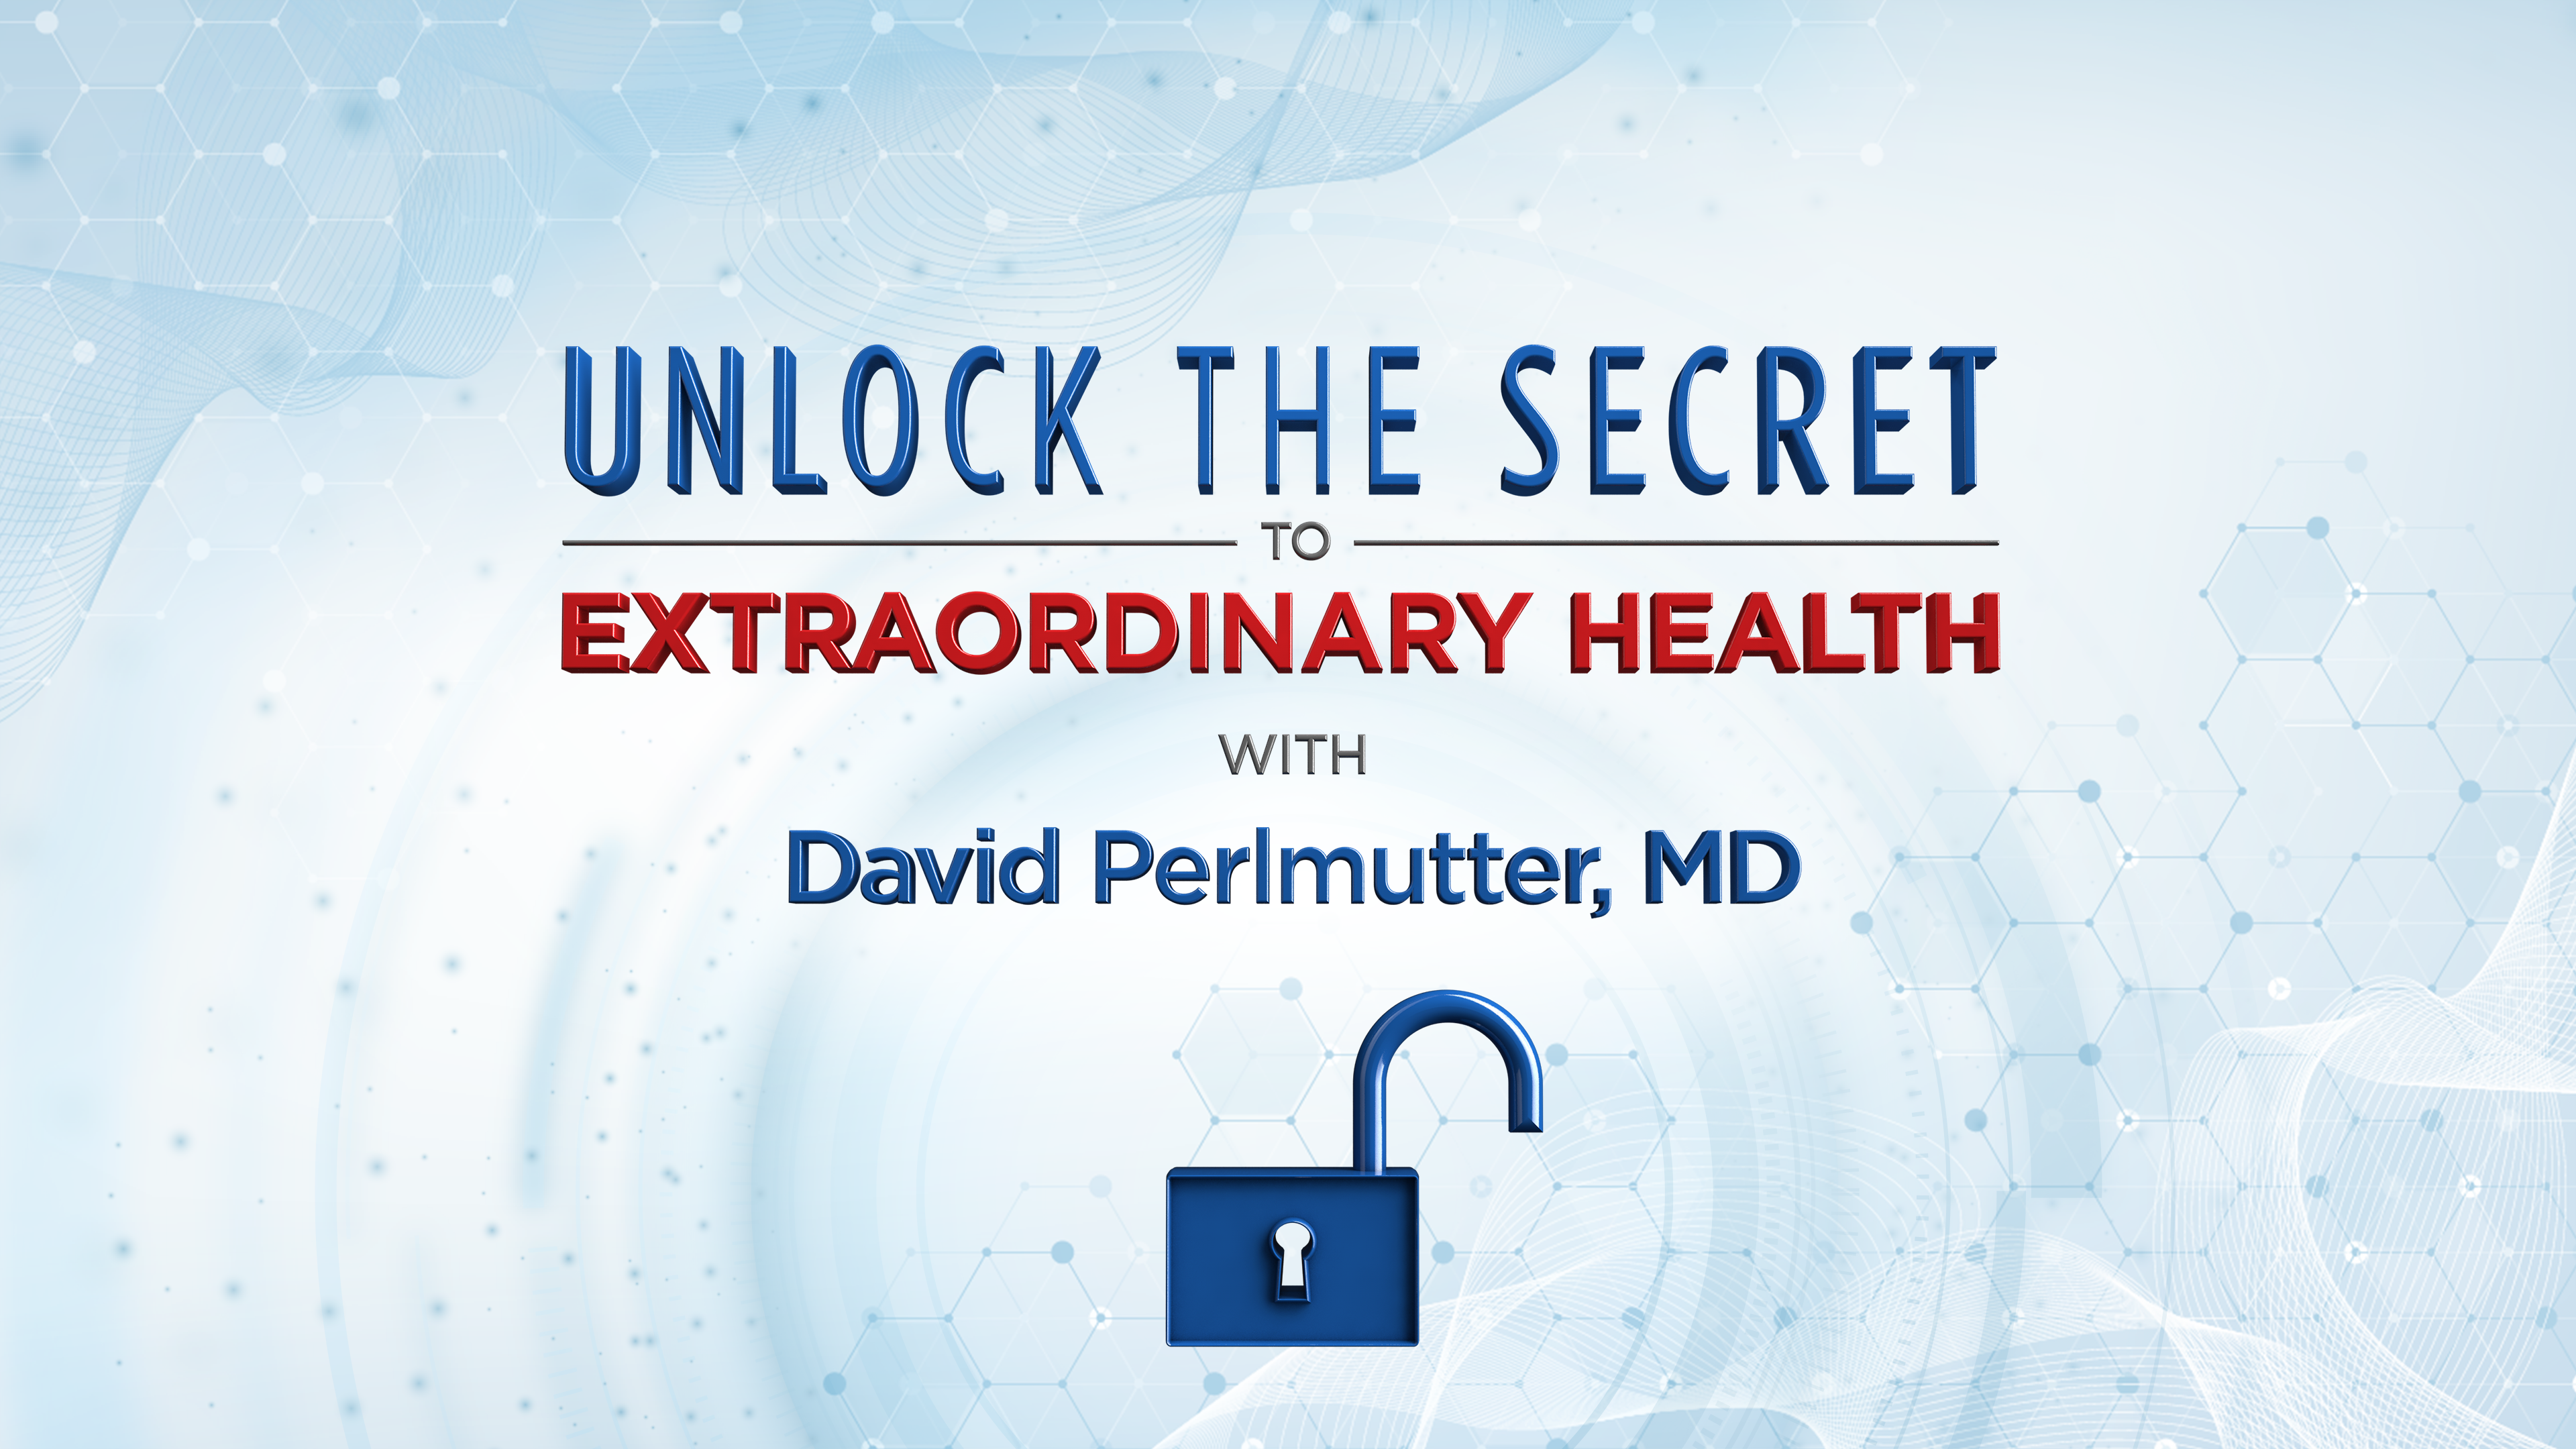 Unlock The Secret To Extraordinary Health with David Perlmutter, MD